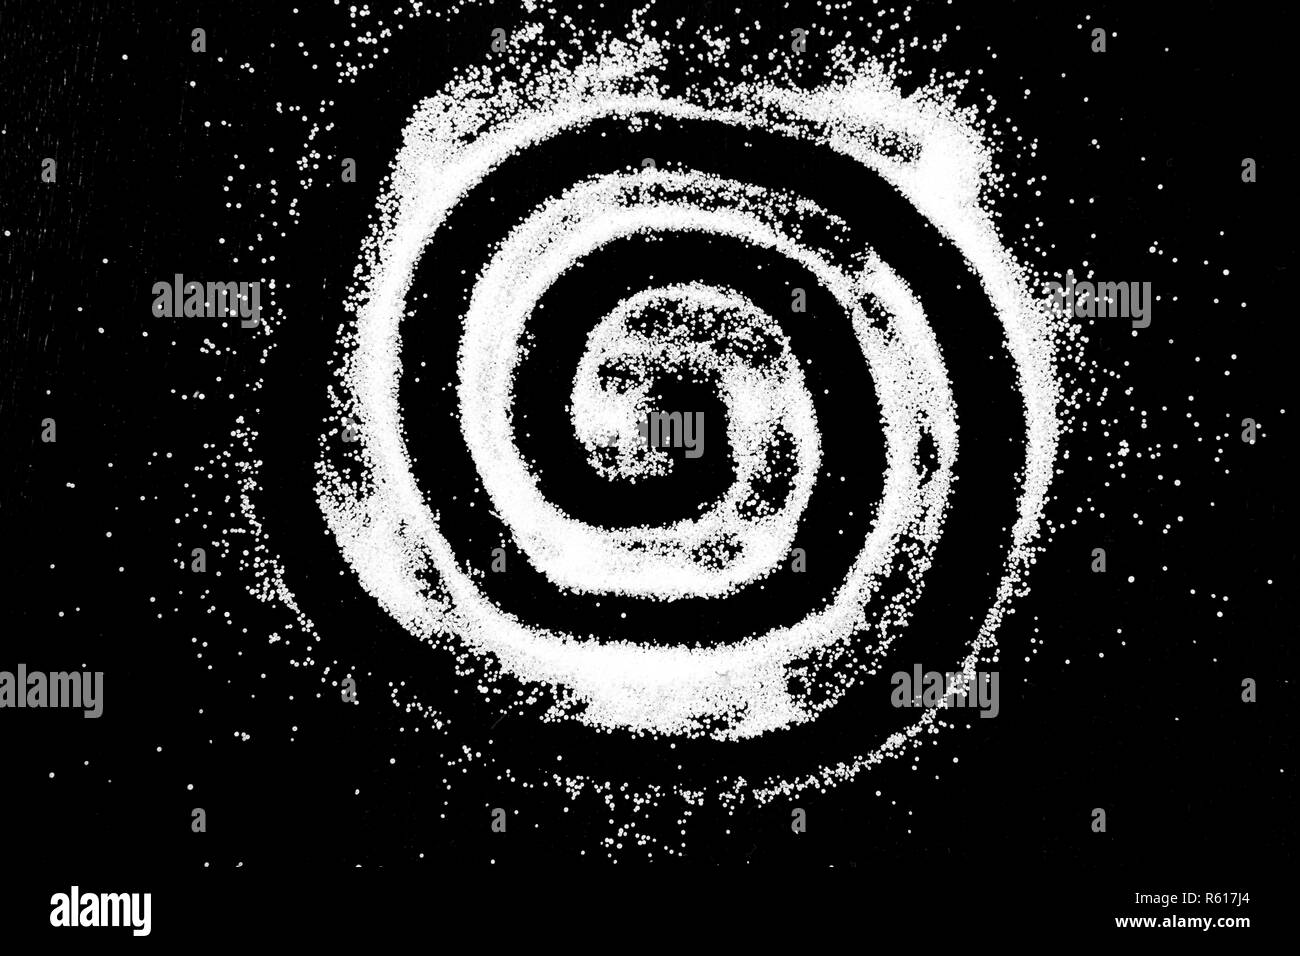 White salt powder circle spiral round cloud on black background. Concept with place for text. Copy space. Stock Photo